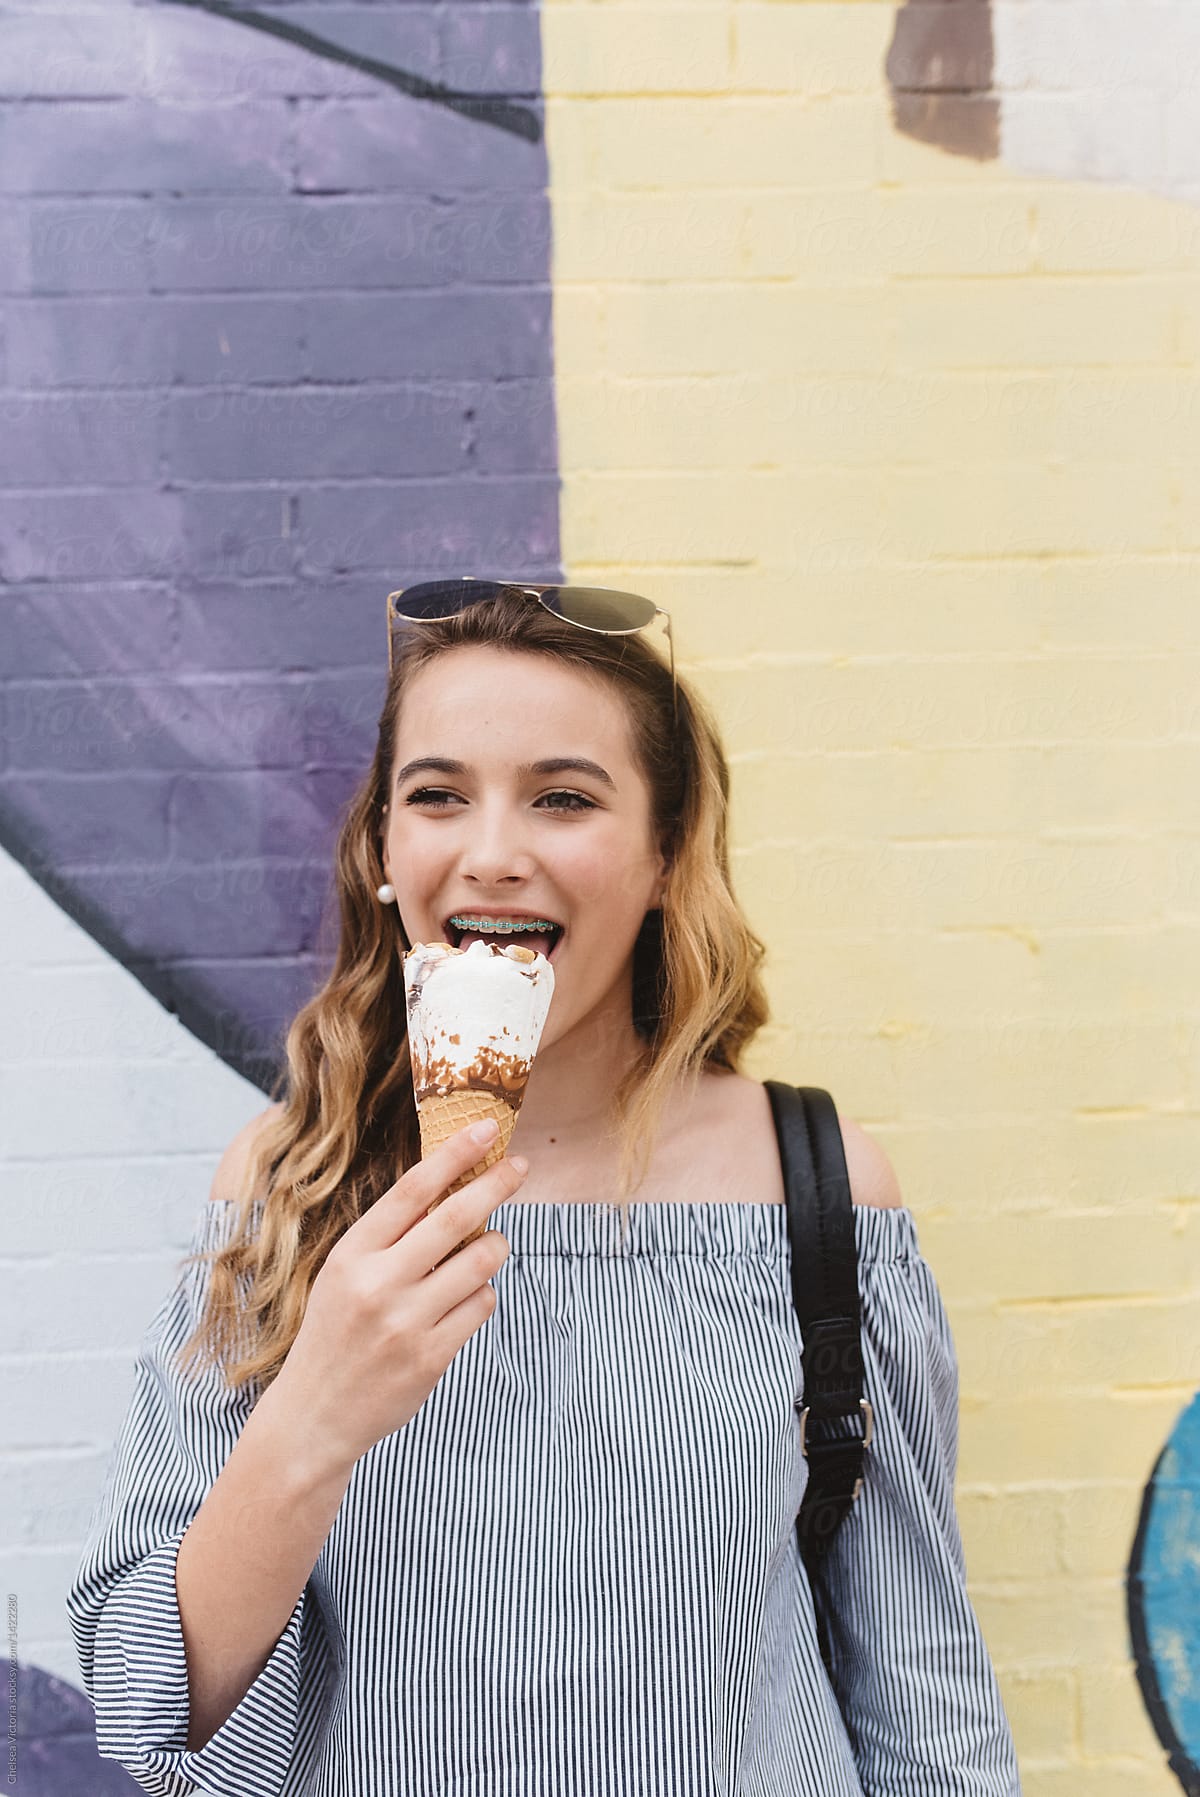 A Teenage Girl Eating Ice Cream In The City By Stocksy Contributor